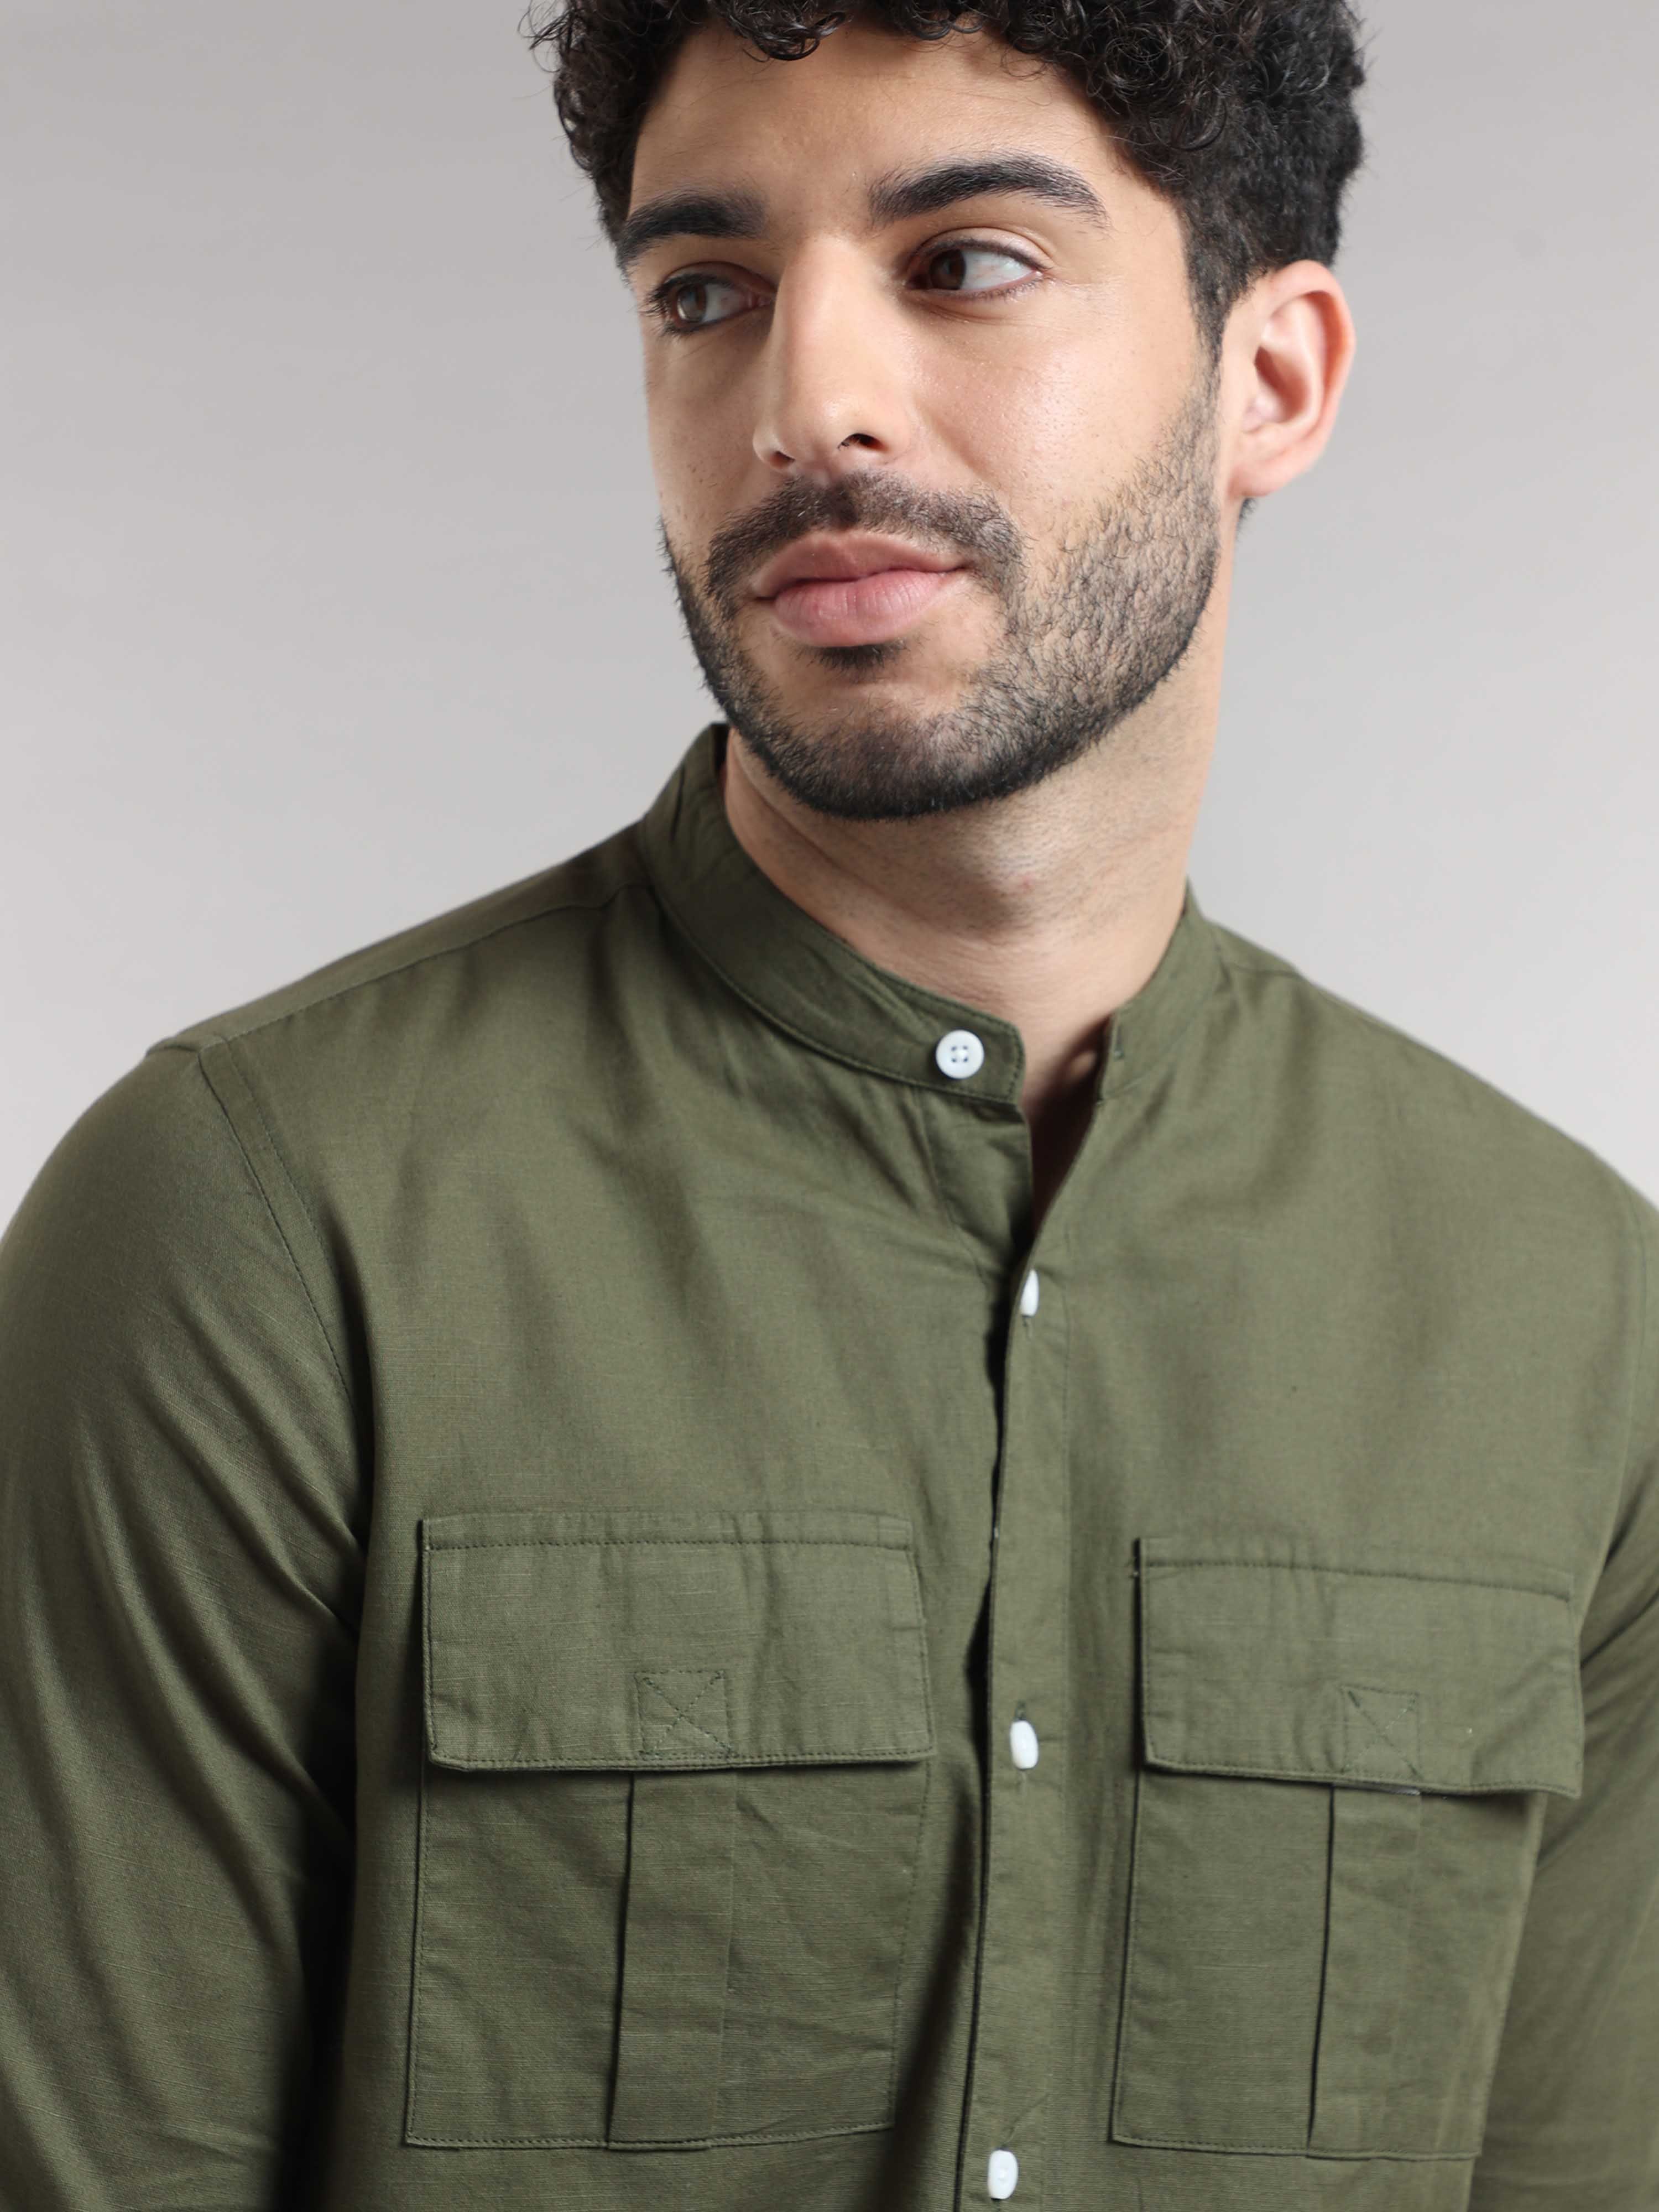 Shop cool Army Green Double Pocket Casual Shirt For MenRs. 1399.00